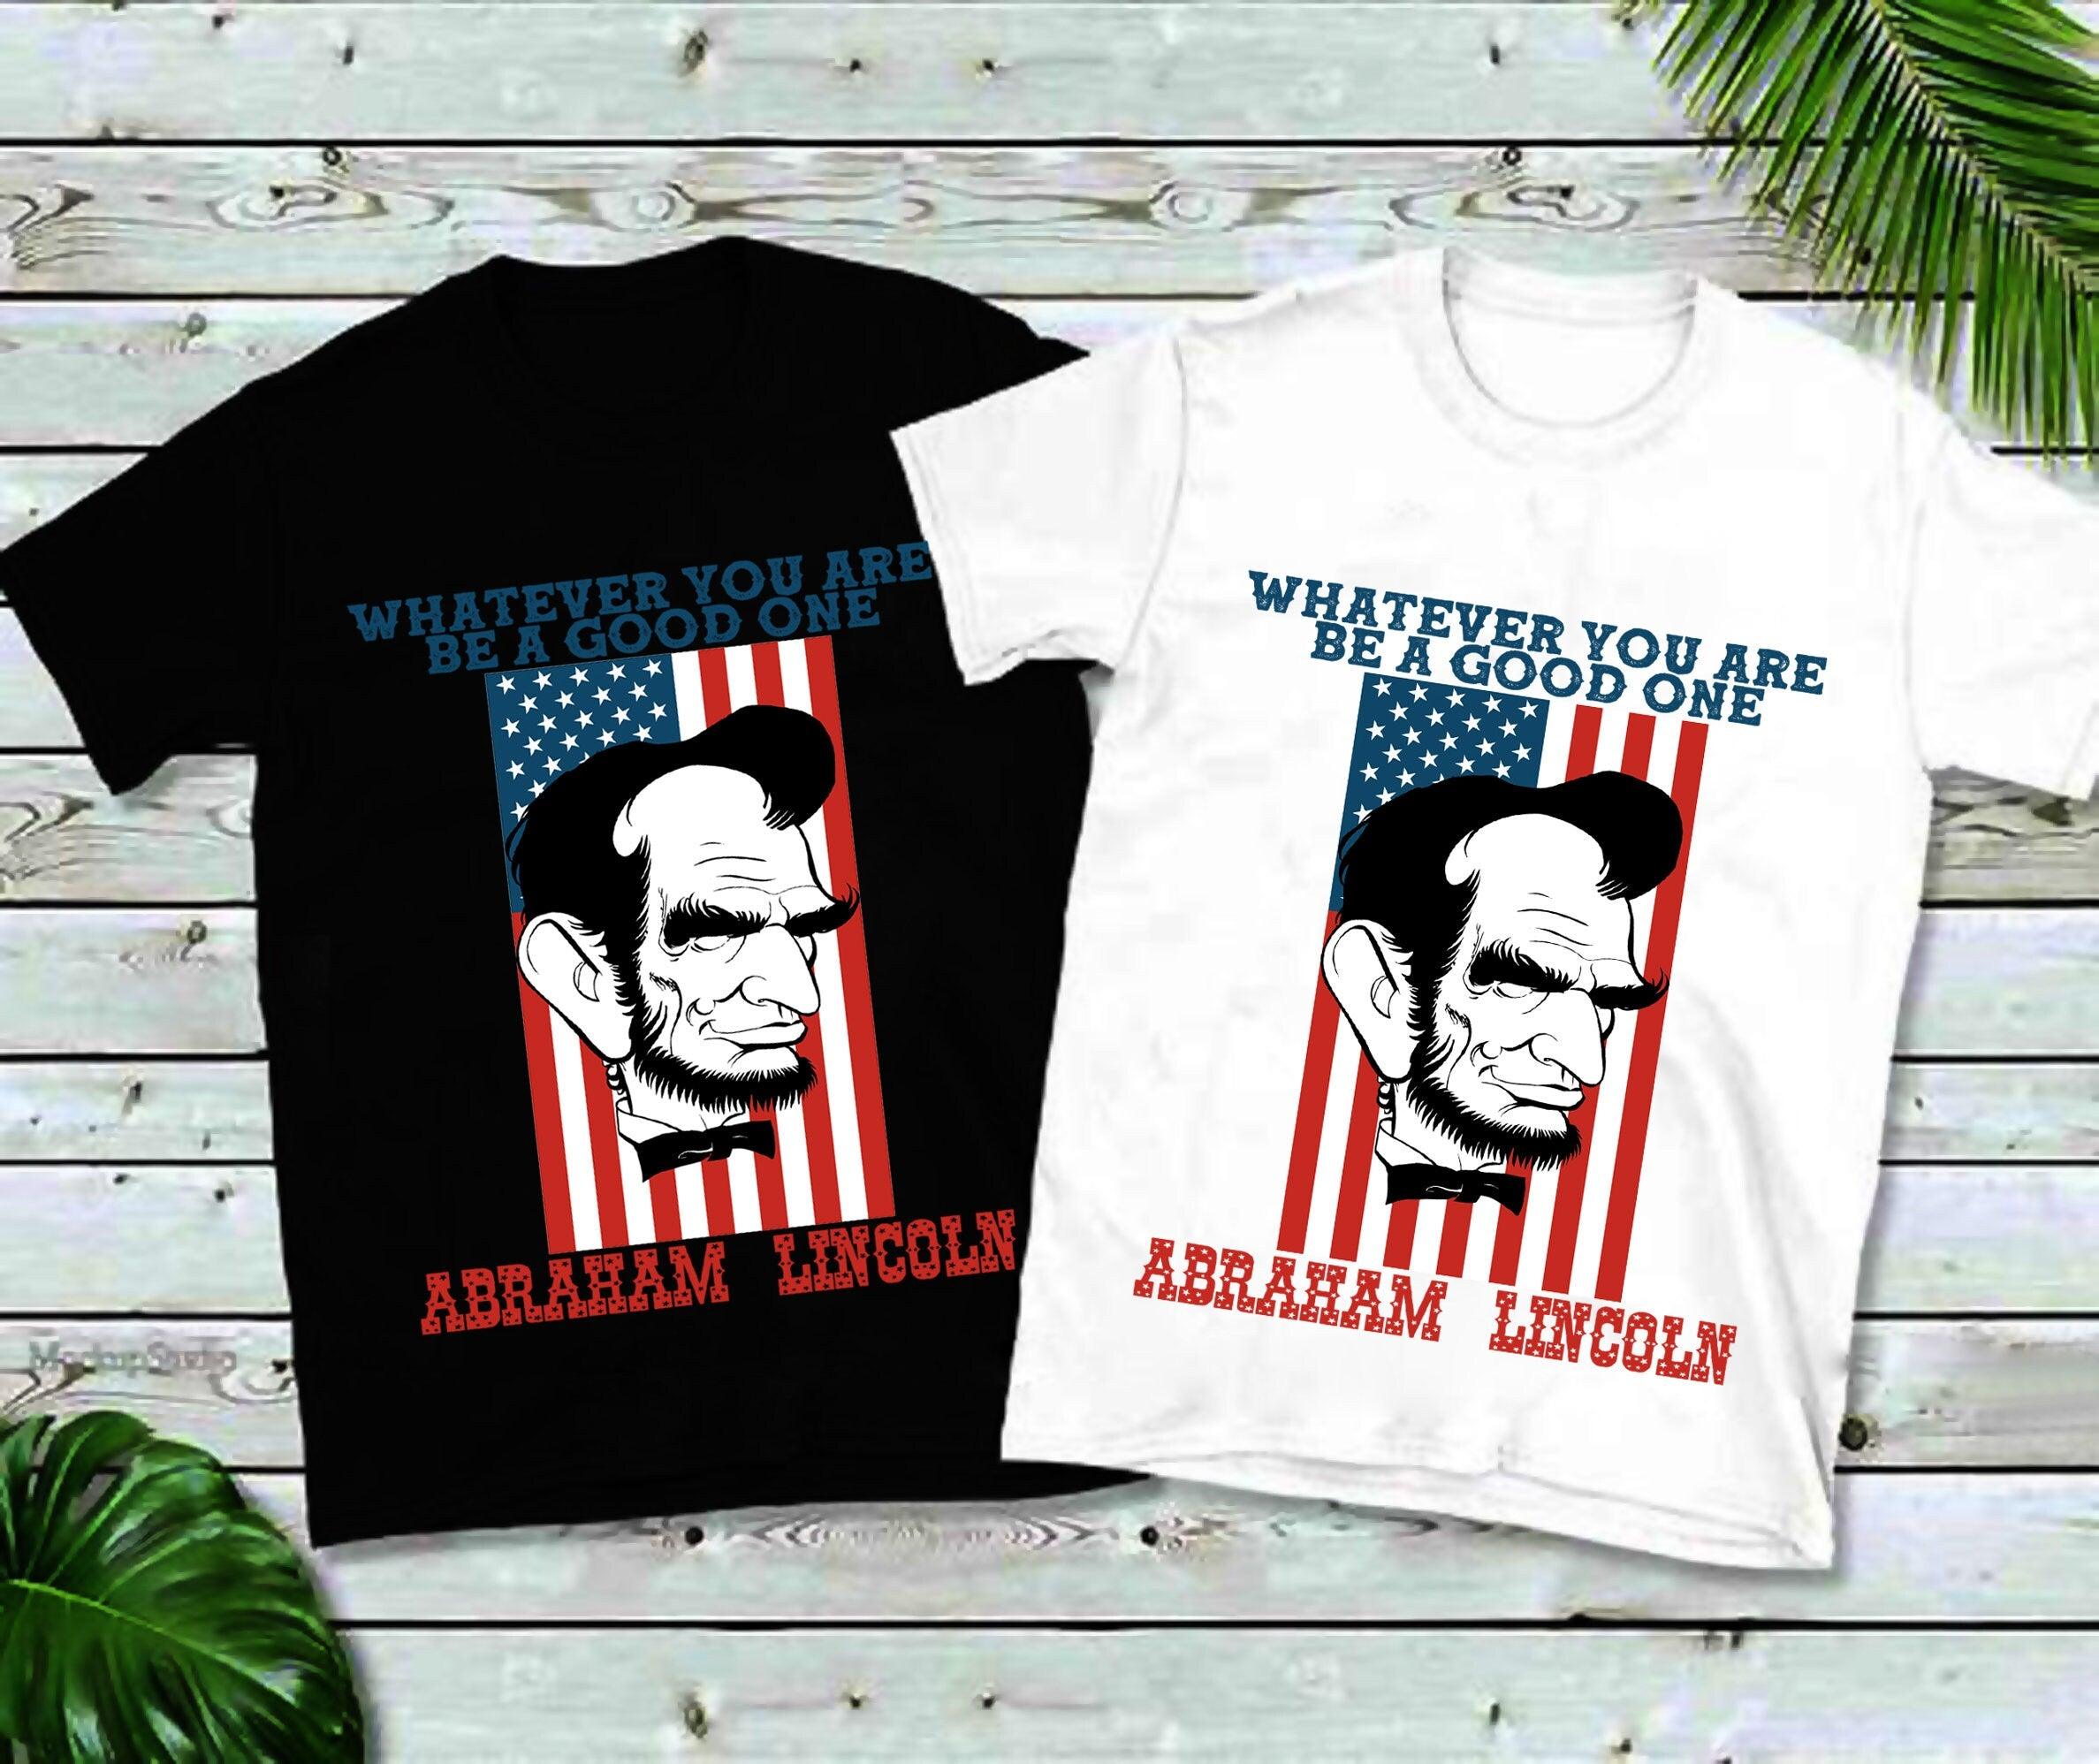 Whatever You Are Be A Good One, Abraham Lincoln T-Shirts, America Shirt, America, 4th of July Tee, Unisex Sized, USA, Abe Lincoln, Patriotic 4th of july shirt, 4th of July Tee, Abe, Abraham Lincoln, America Shirt, America T, american shirt, fourth of july, Freedom, July 4th USA USA, red white and blue, Red White Blue, Unisex Sized, USA T - plusminusco.com